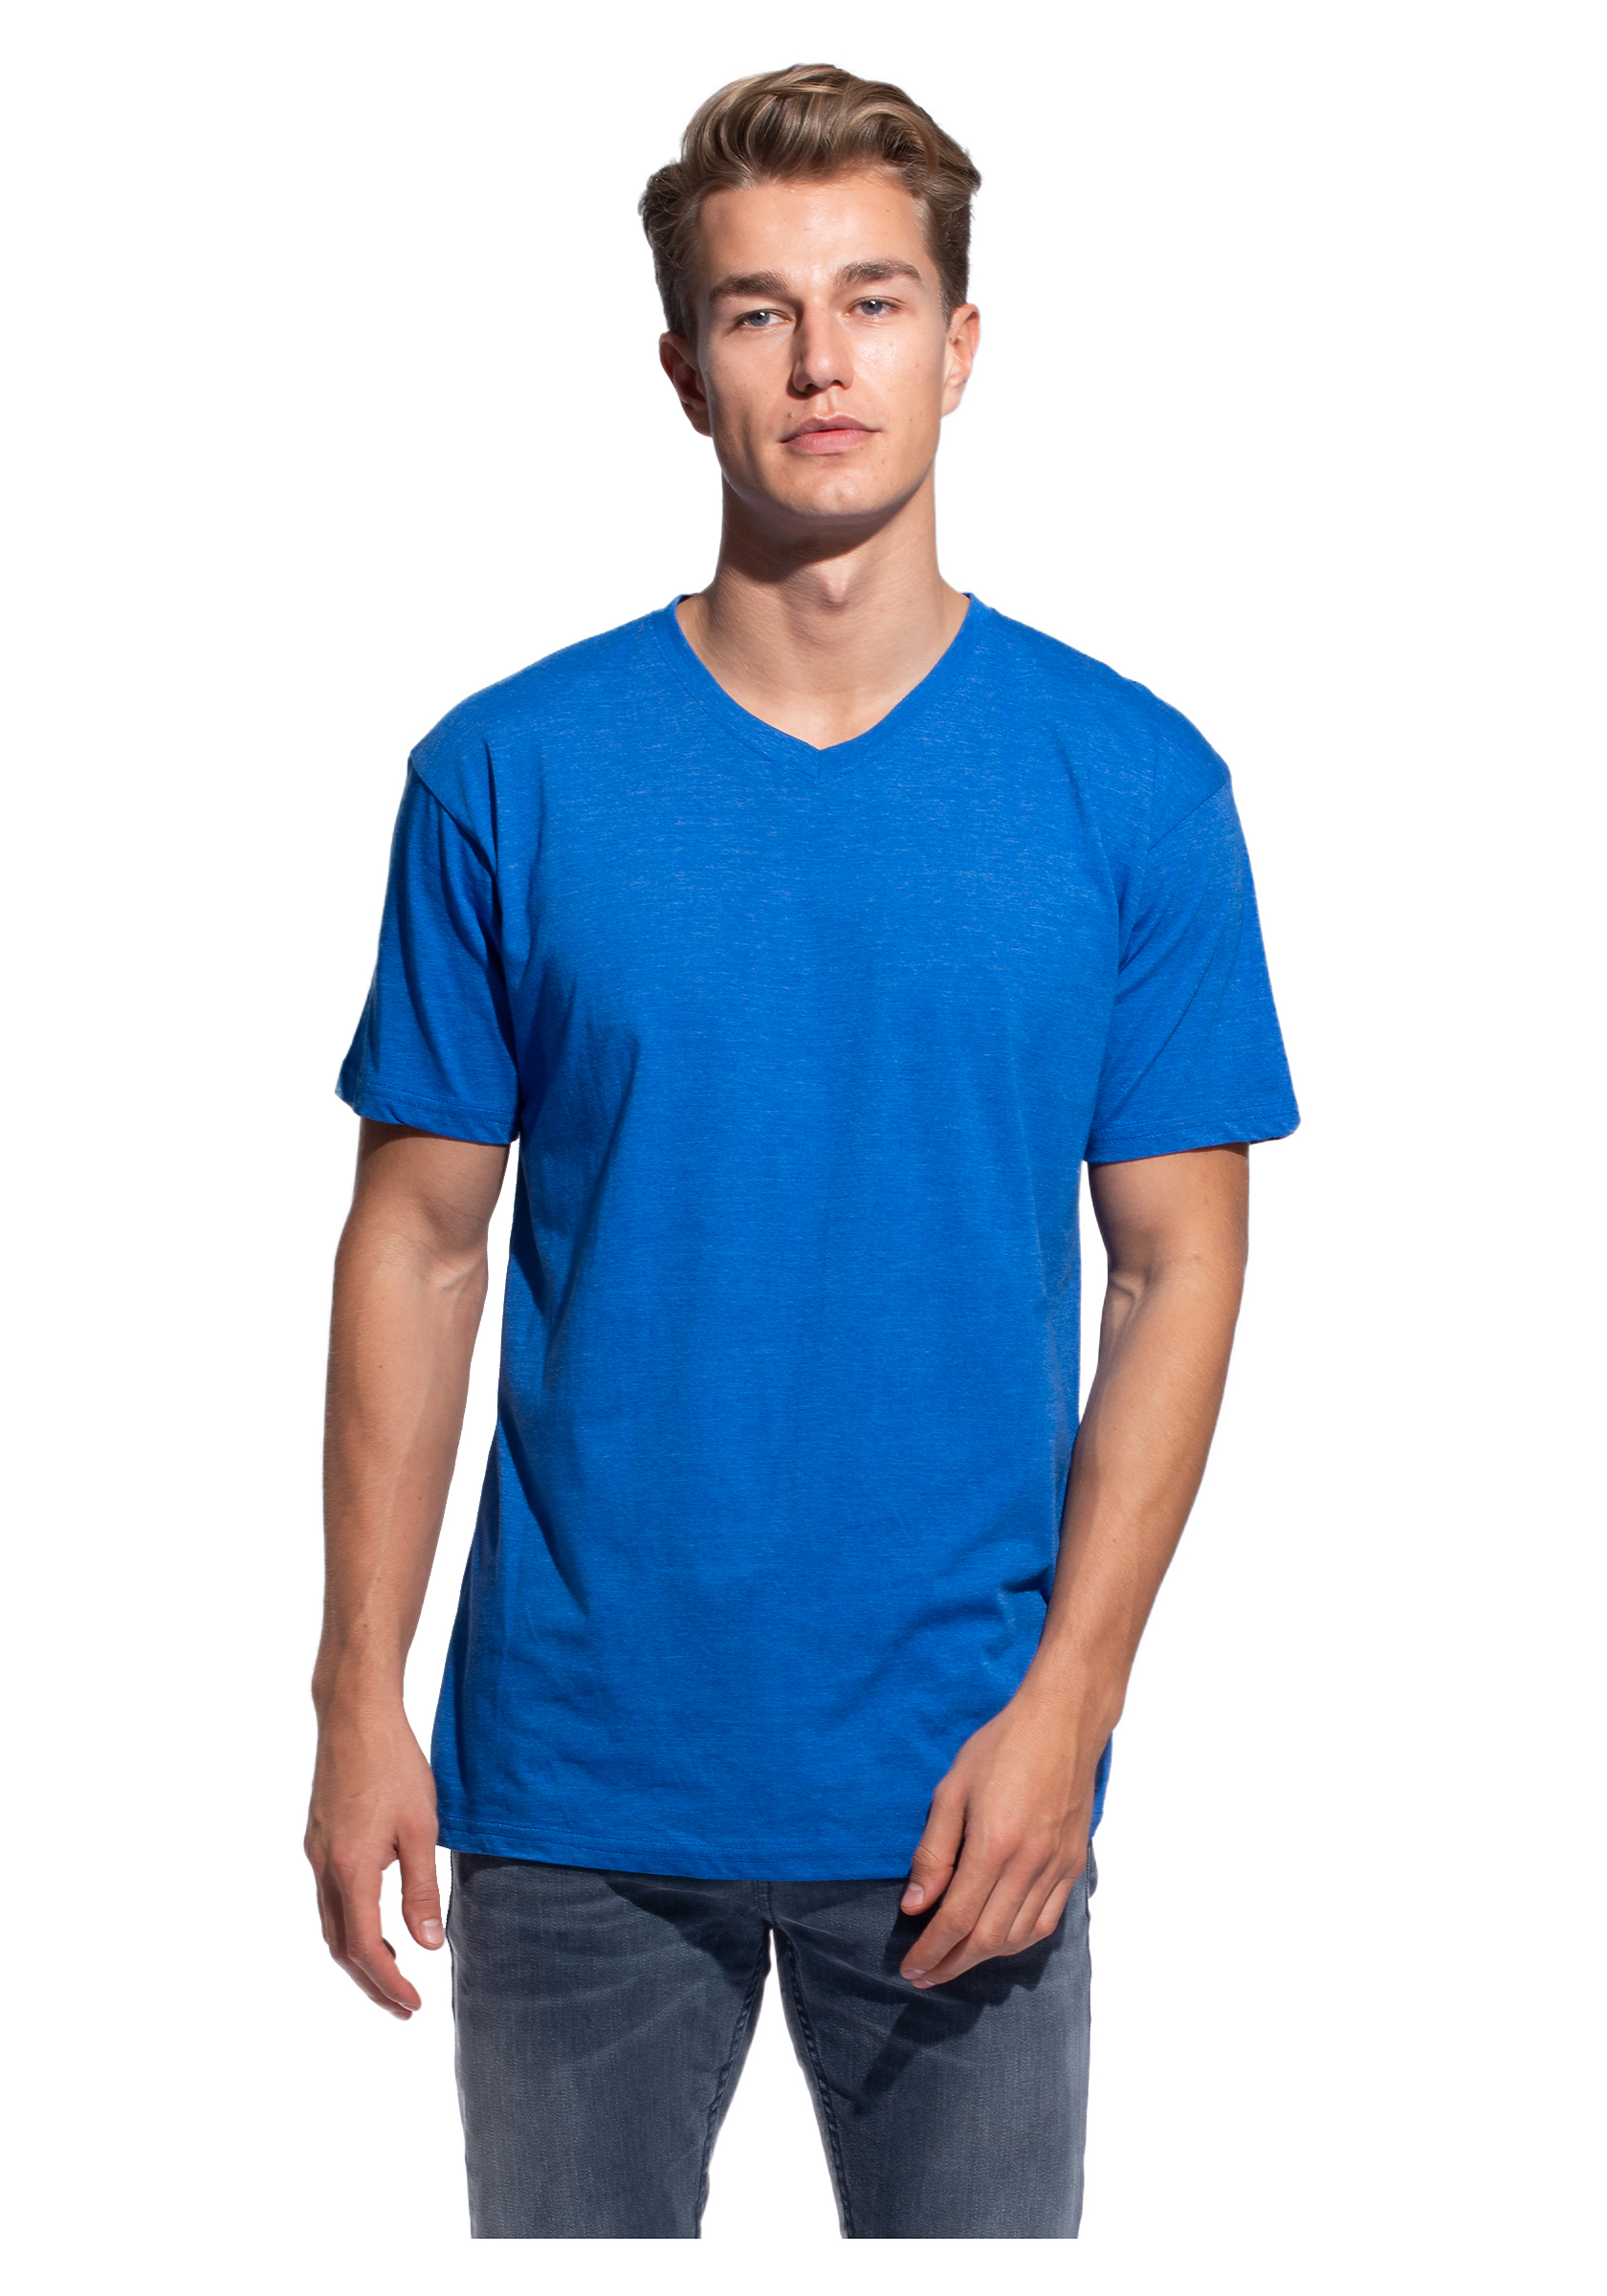 Mens V Neck T Shirt Cotton Heritage | Free Download Nude Photo Gallery